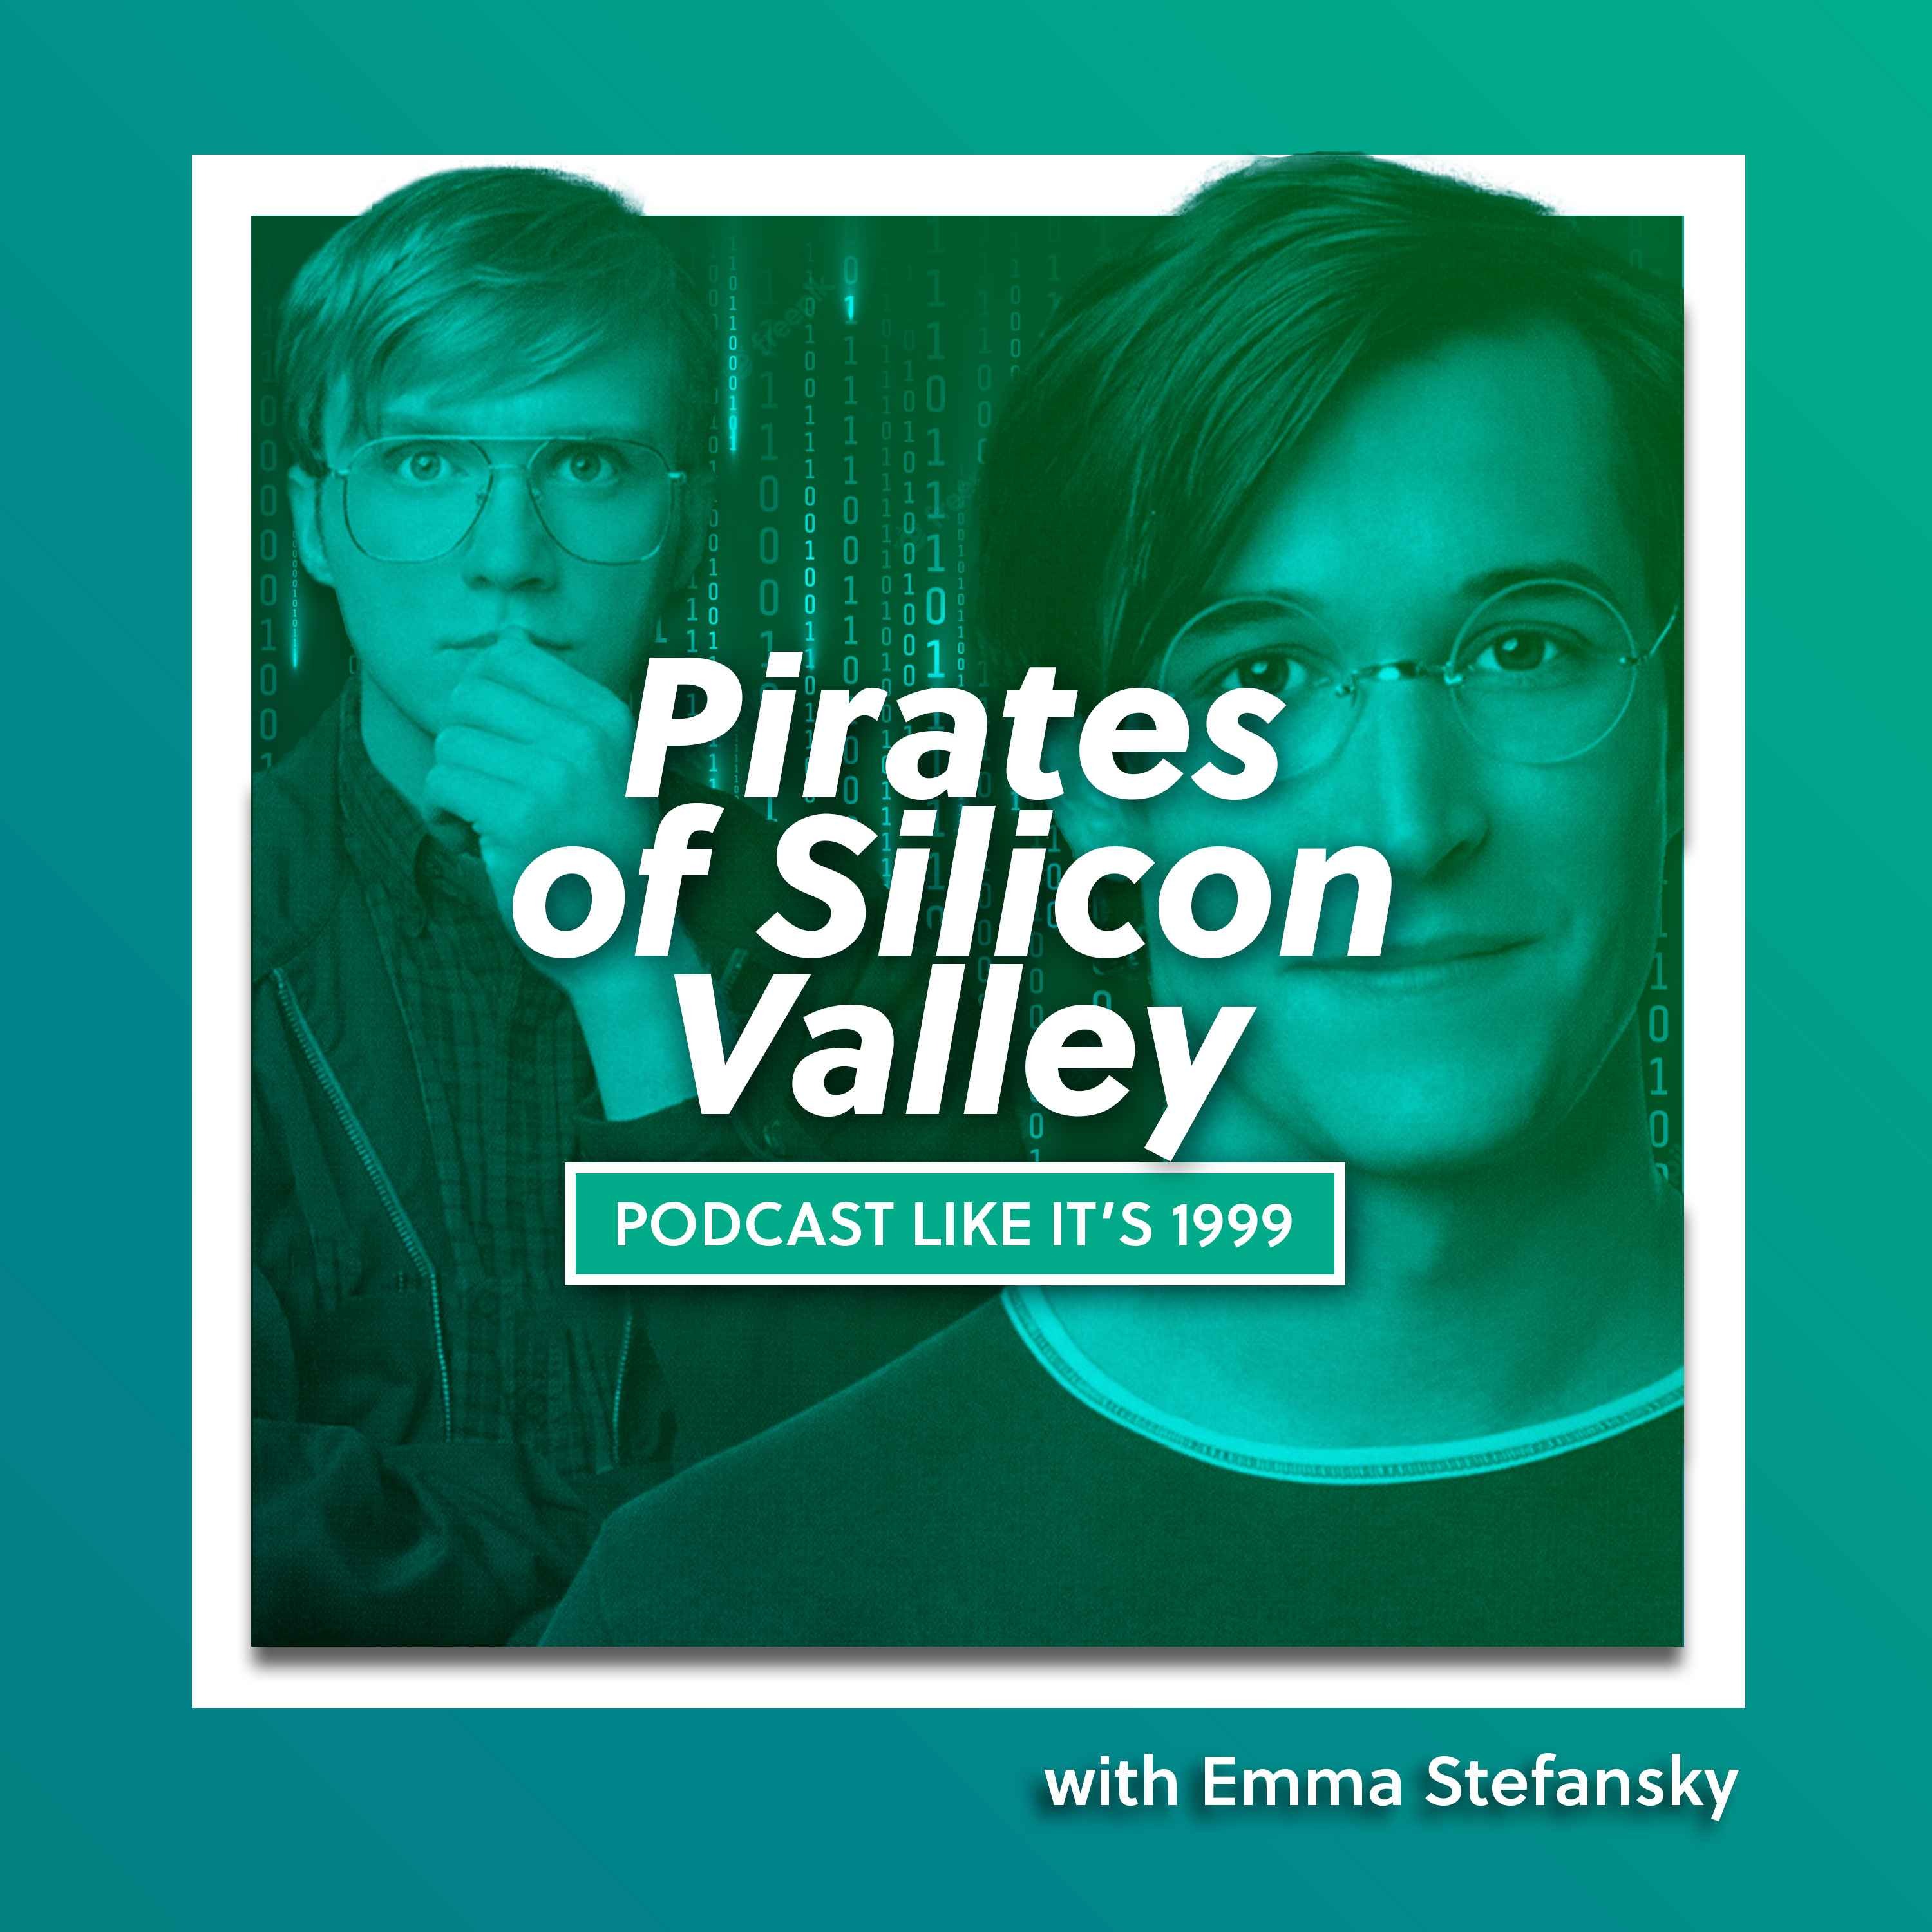 243: Pirates of Silicon Valley with Emma Stefansky